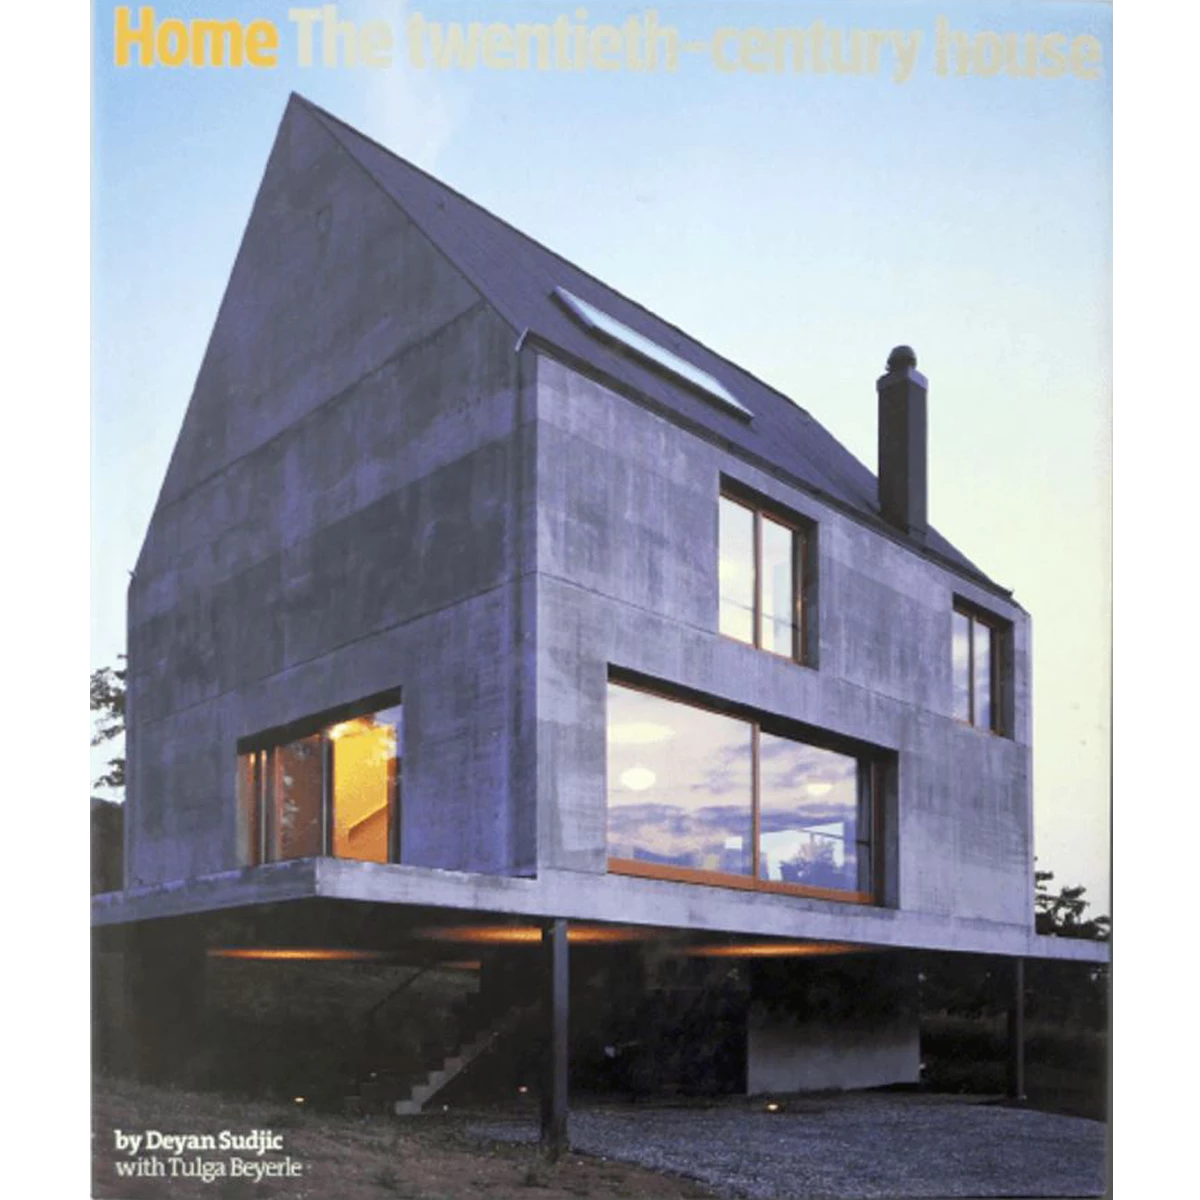 Home: The 20th Century House